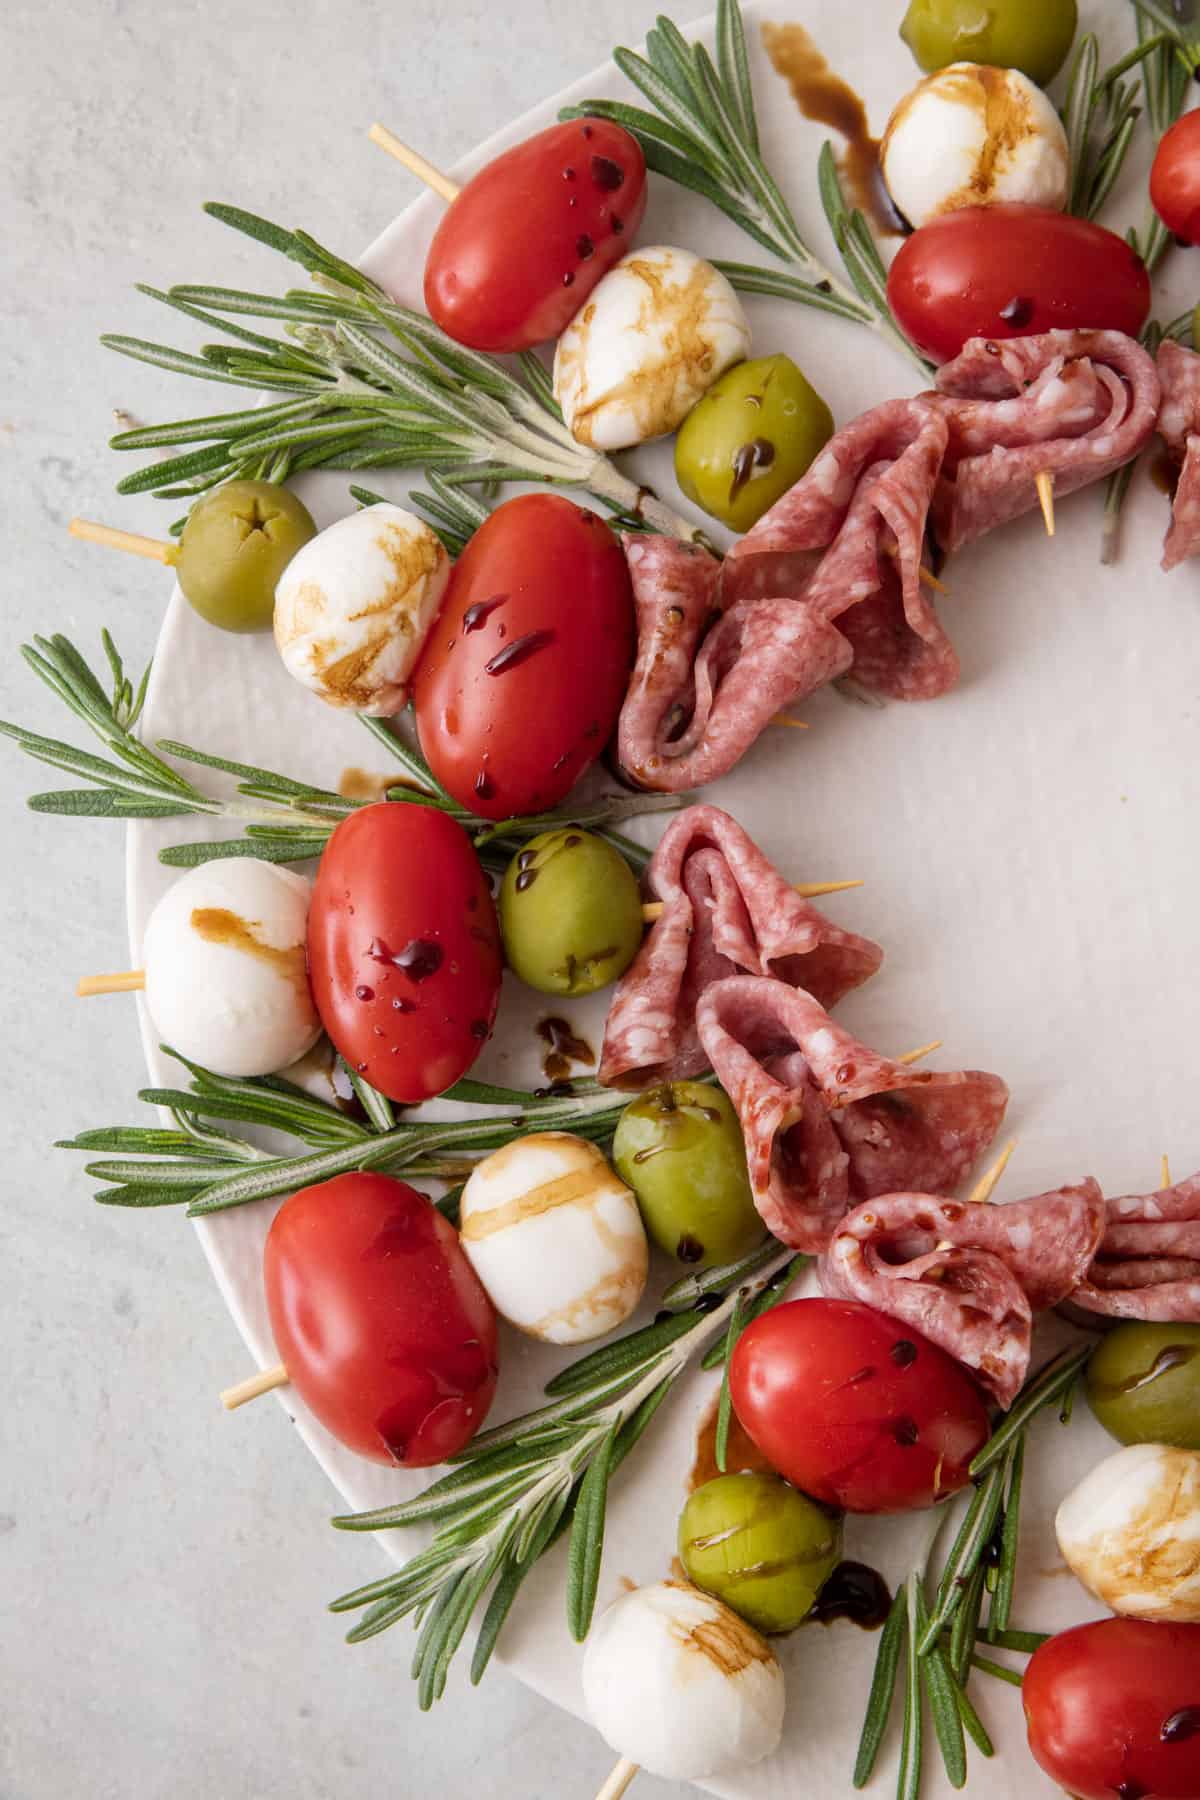 Close up of charcuterie wreath show each toothpick with an olive, mozzerella ball, tomato, and salami with rosemary between each and drizzled with balsamic glaze.